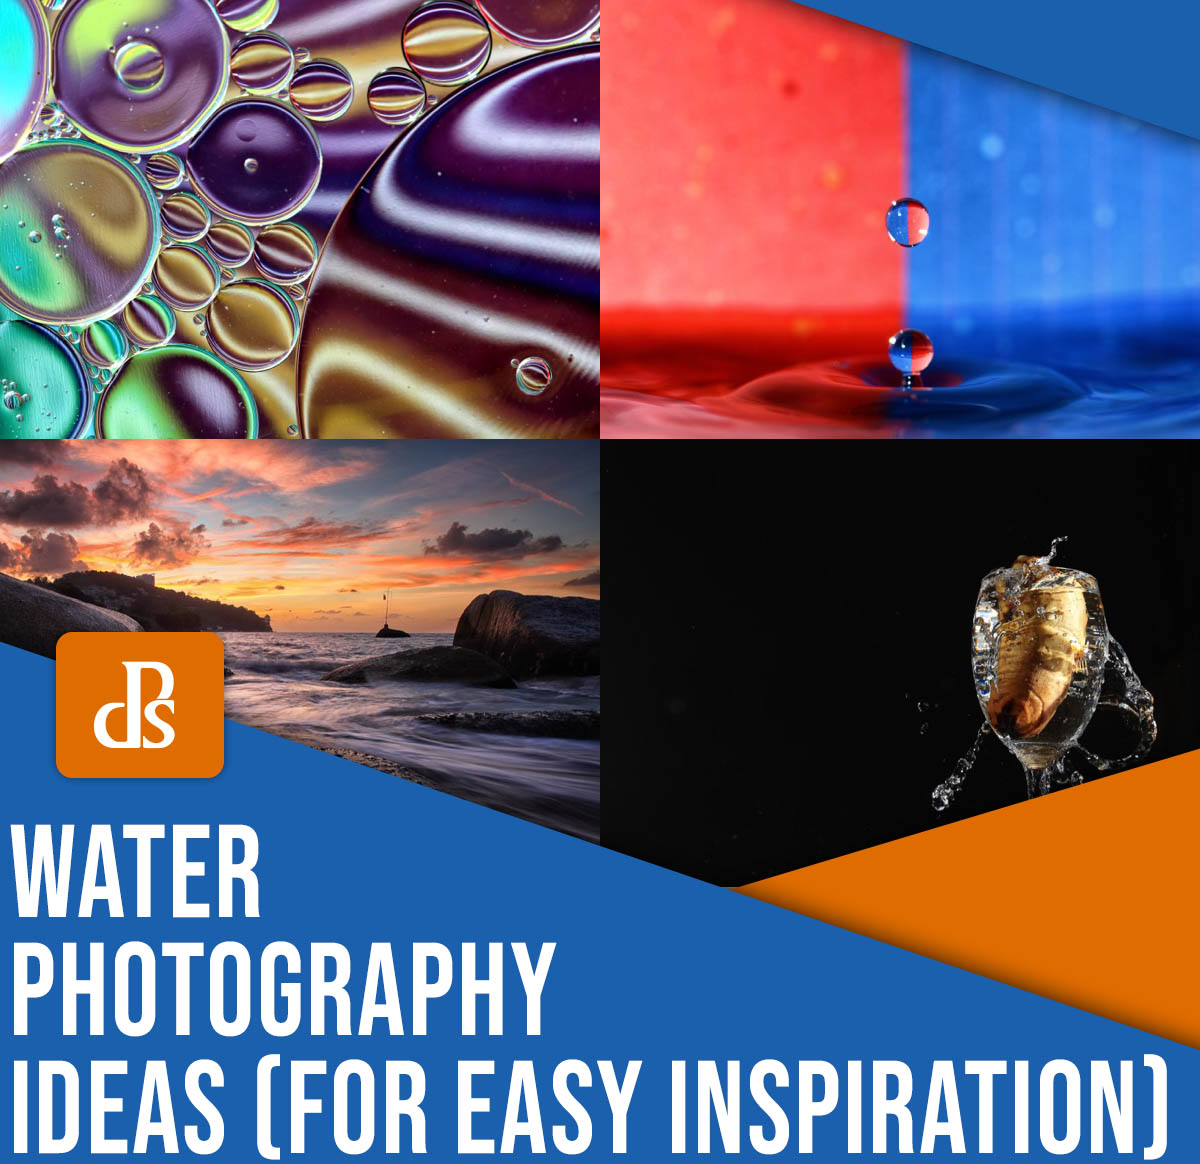 Water photography ideas for easy inspiration